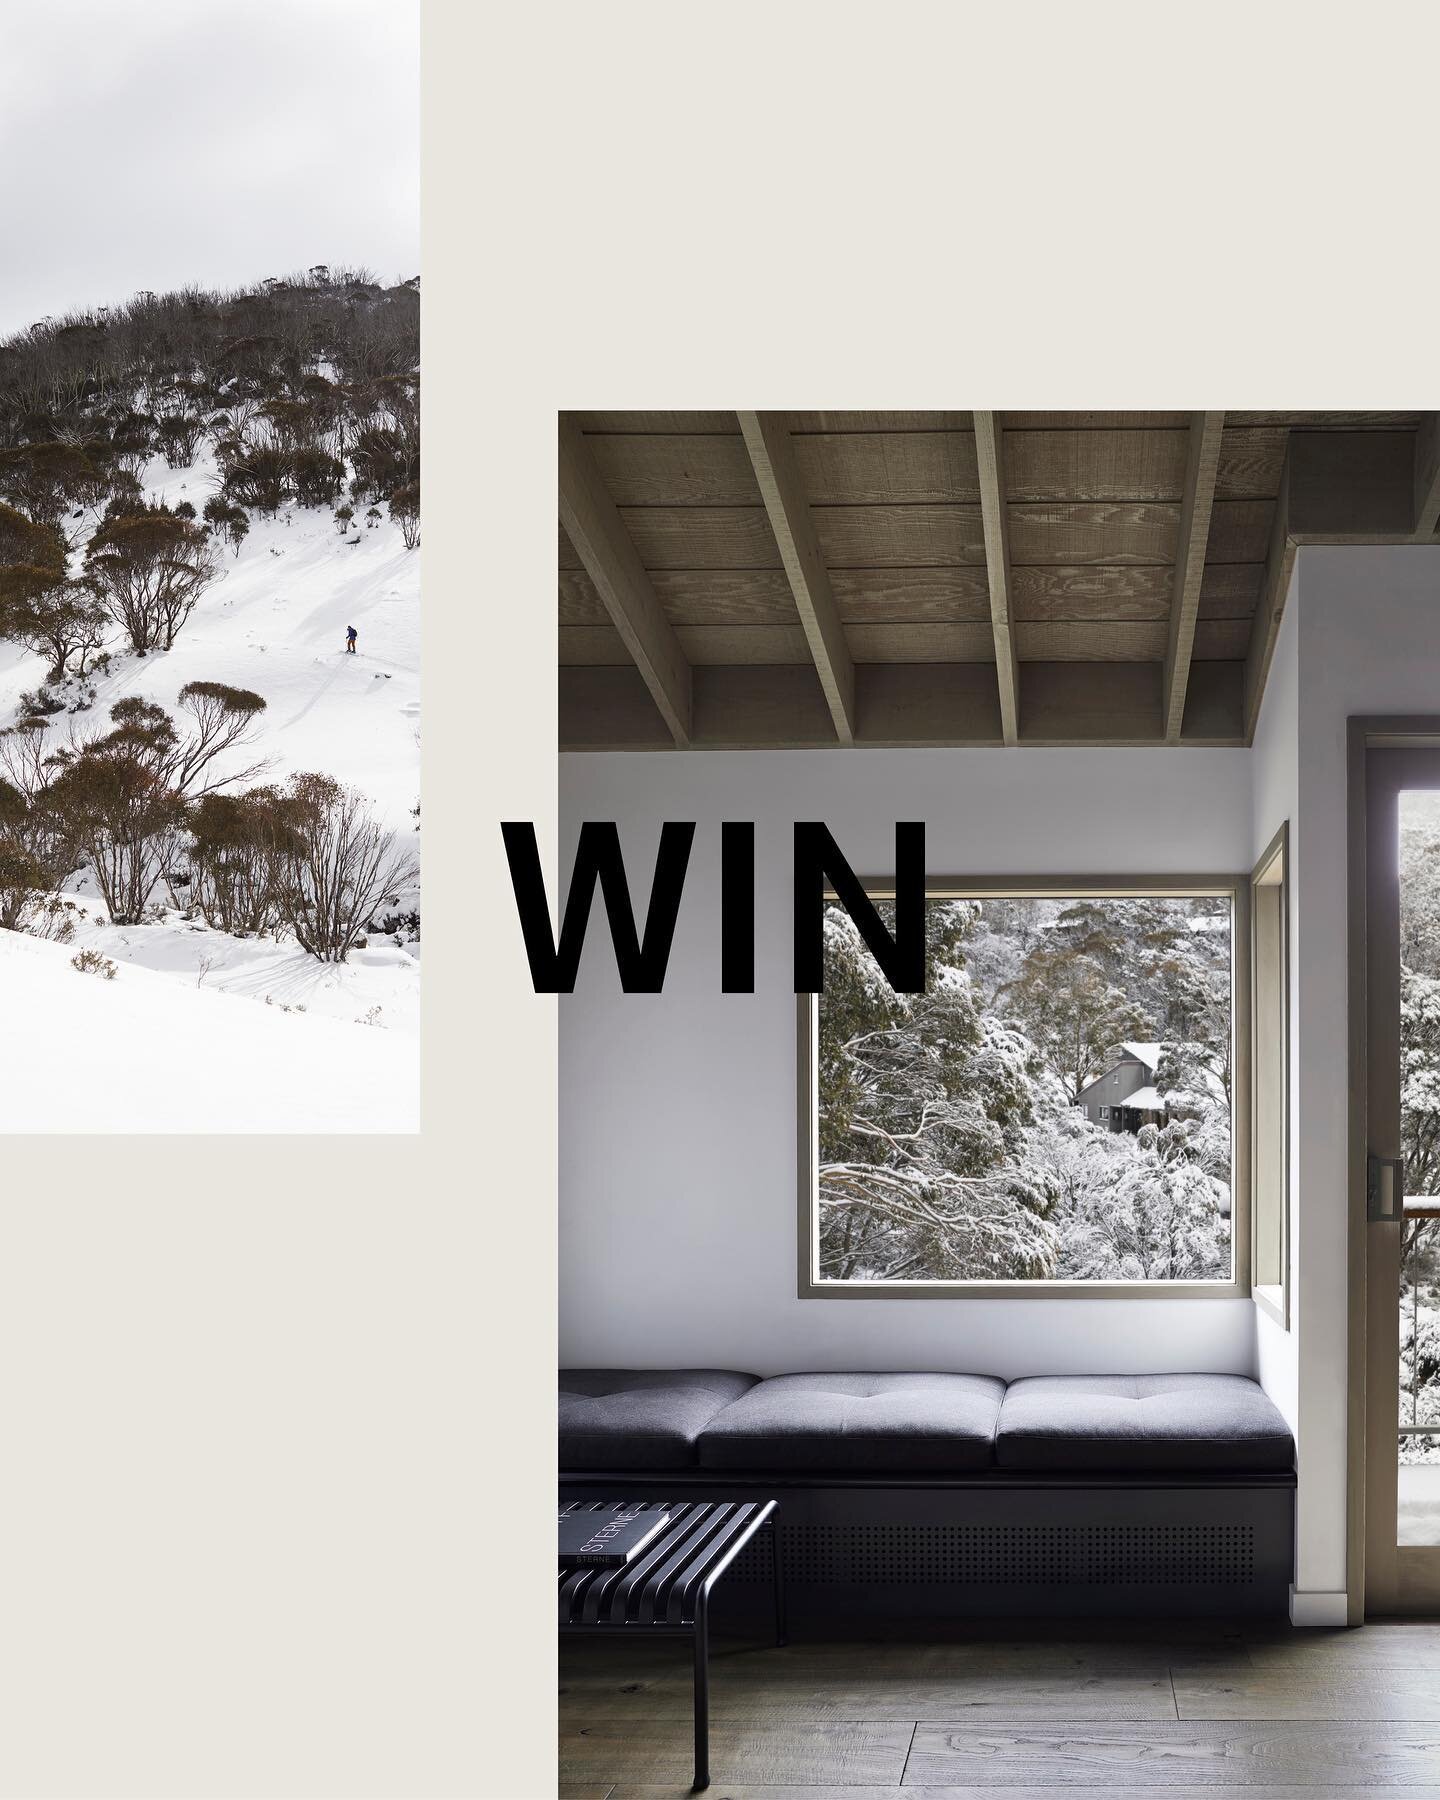 It's your LAST CHANCE TO WIN the ultimate winter escape! We&rsquo;ve teamed up with friends to offer one lucky winner
and a guest a two-night stay at The Eastern Thredbo plus gifts from IN BED and Leif
Products. For your chance to win:
⠀⁠
〰️ Follow @